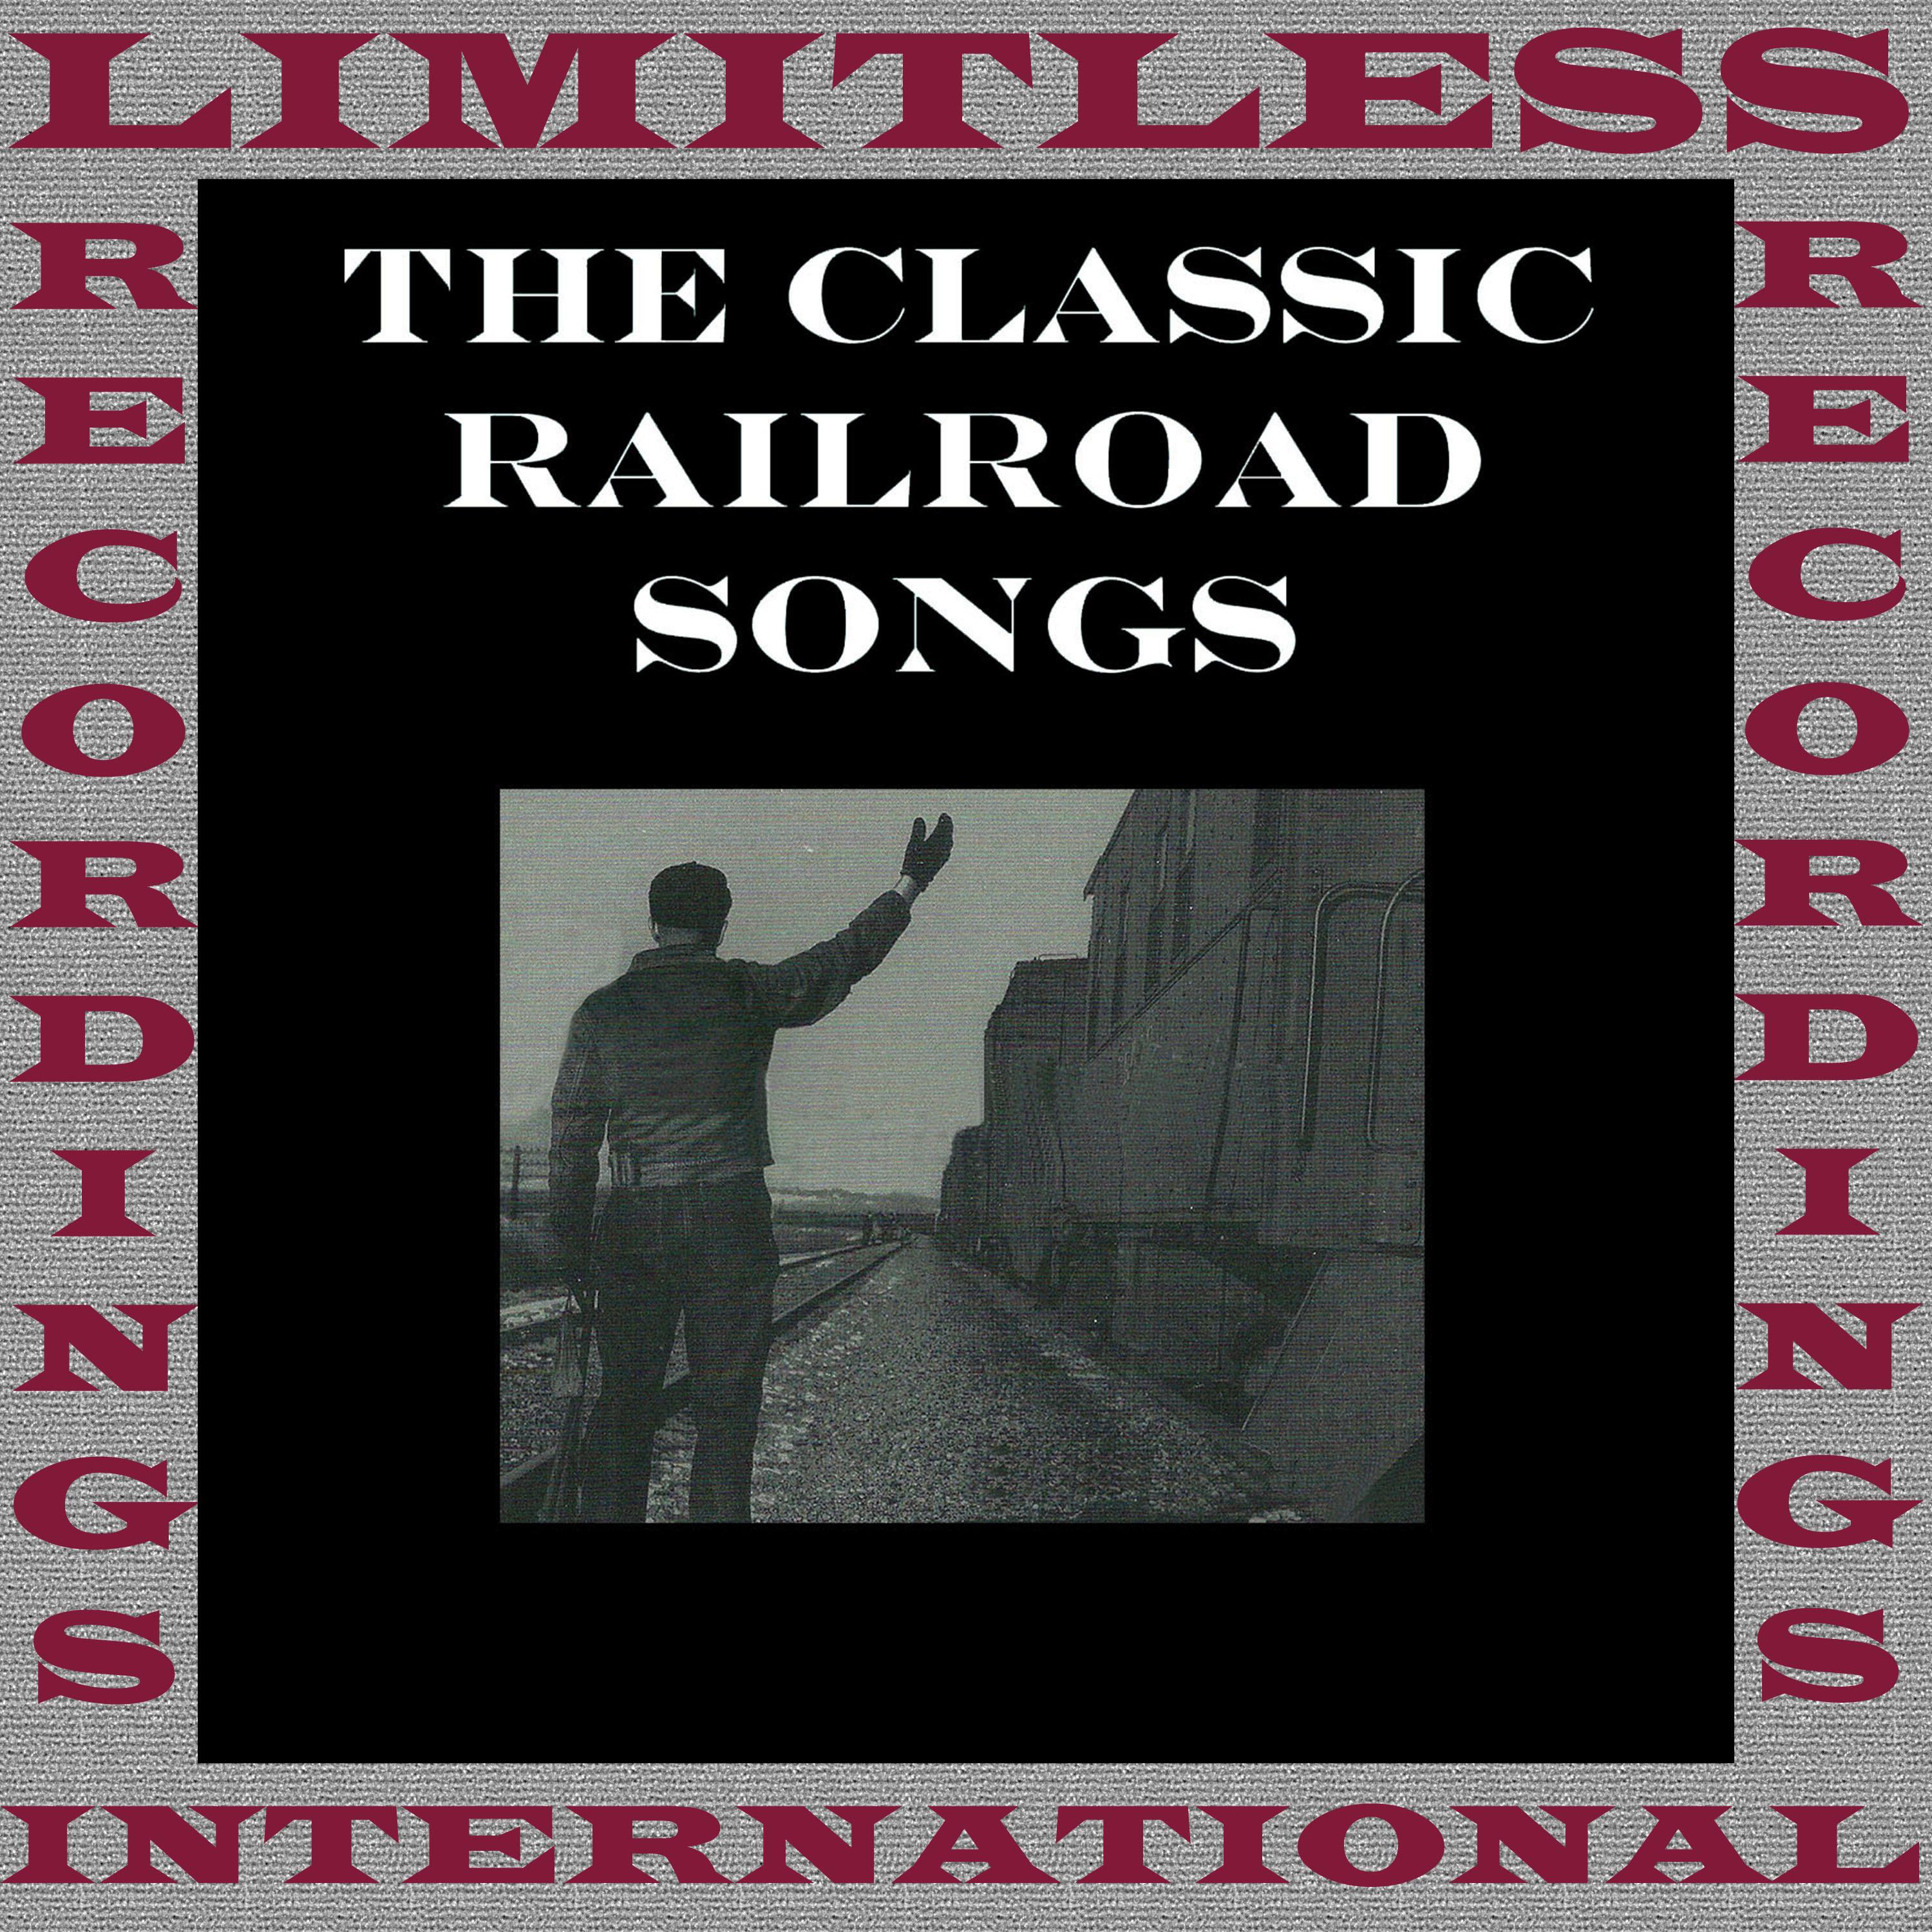 The Classic Railroad Songs